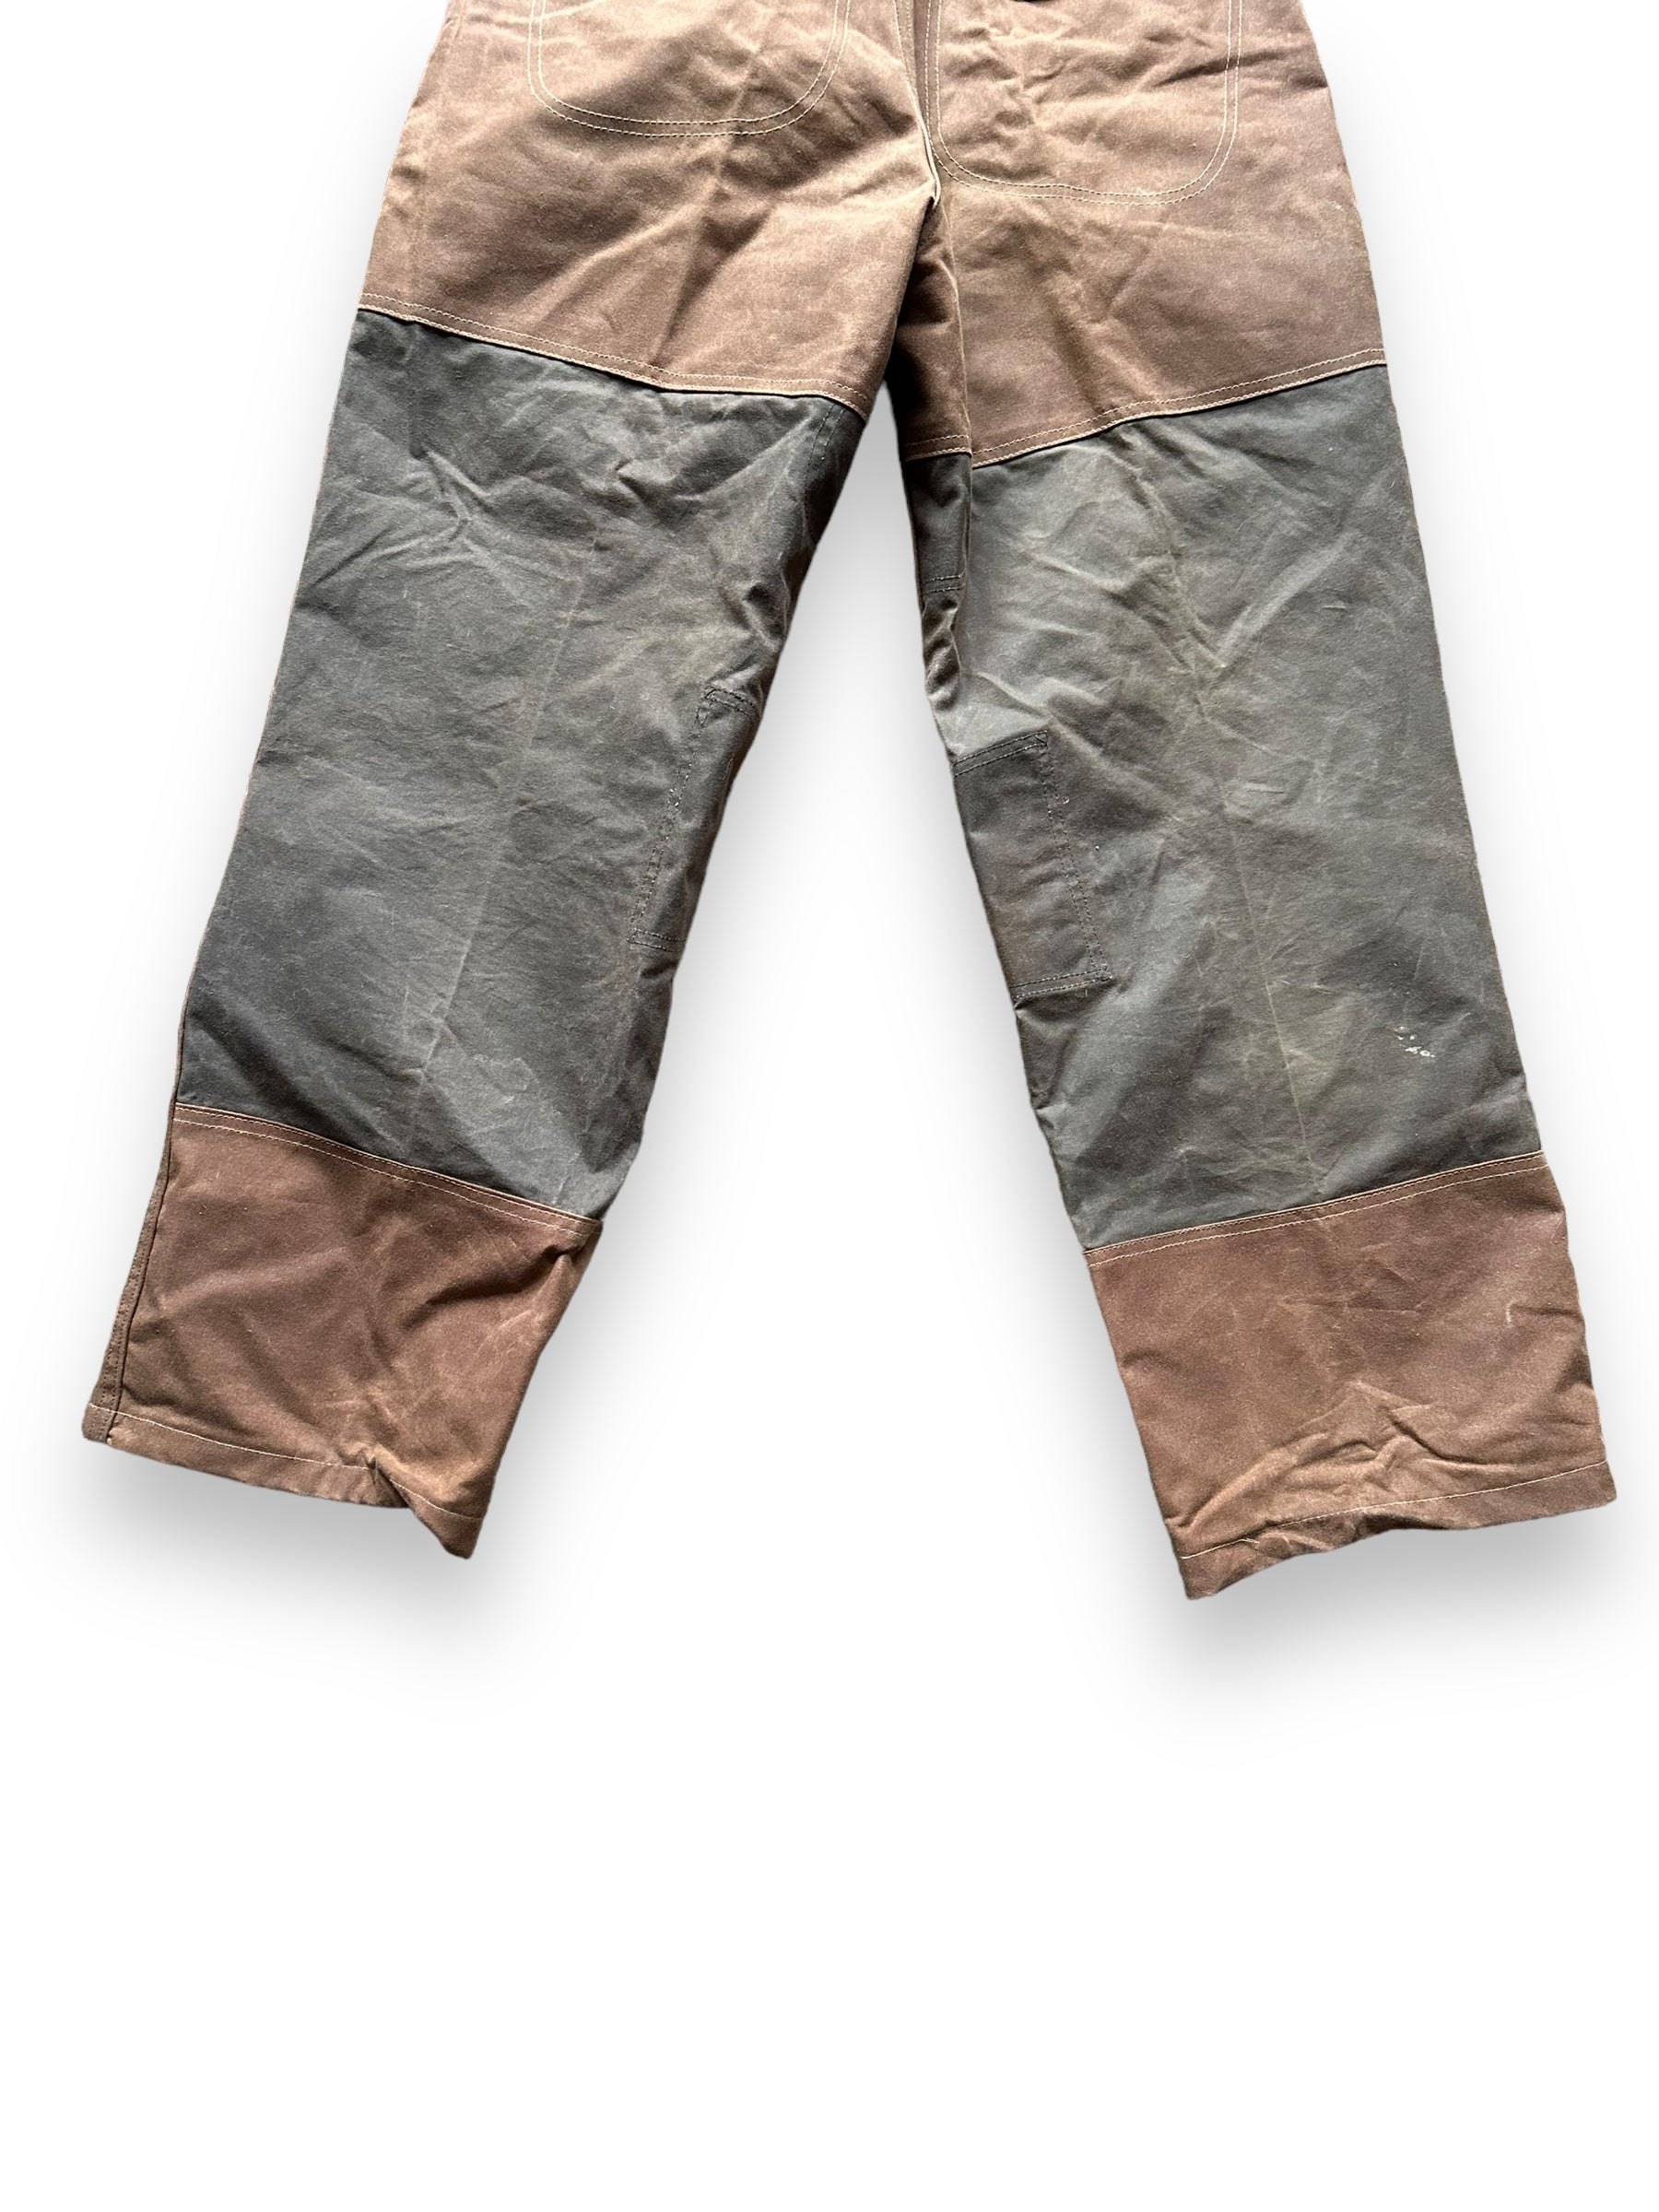 Lower Rear View of Vintage Filson Tin Cloth Double Hunting Pants W34 |  Barn Owl Vintage Goods | Filson Bargain Outlet Seattle